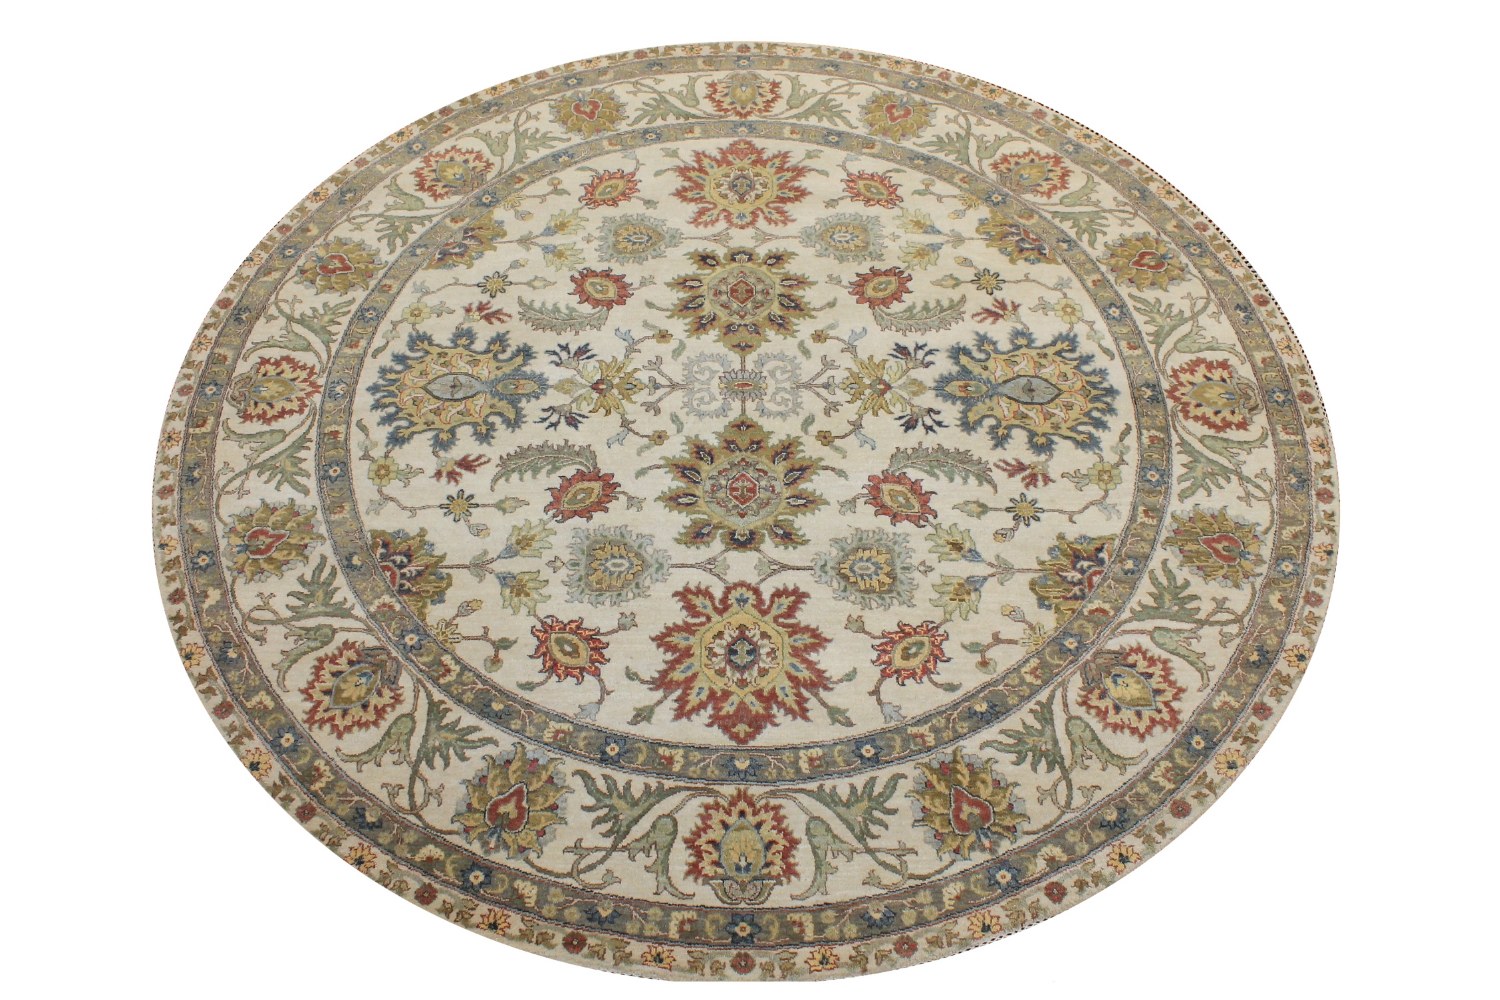 8 ft. Round & Square Traditional Hand Knotted Wool Area Rug - MR025818